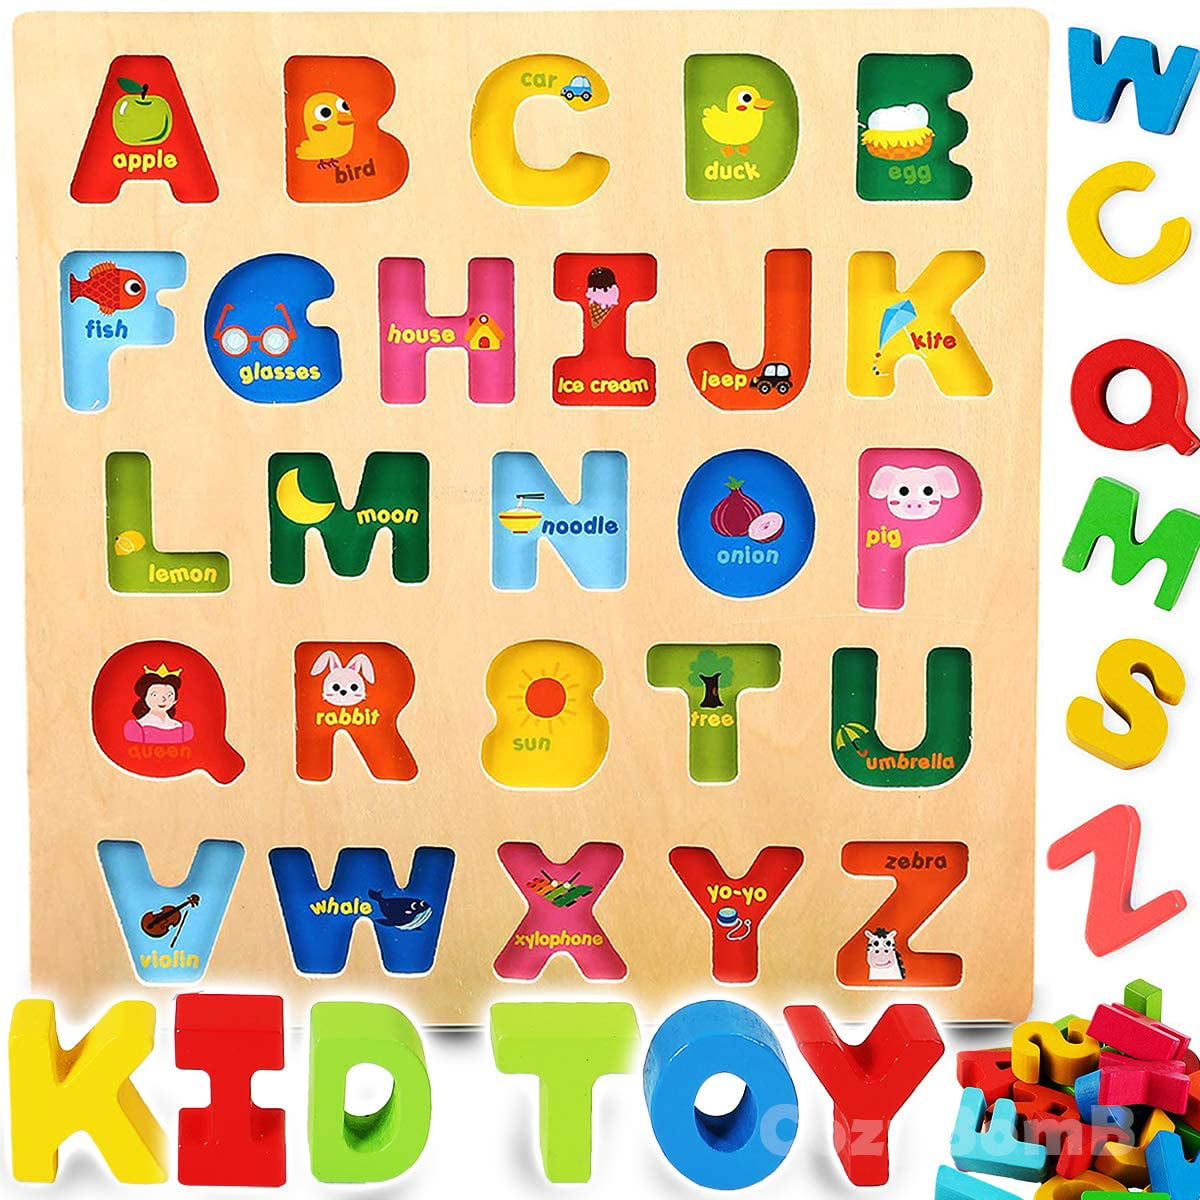 Free Child Learning Abc Games Abc Game Kids Alphabet Toddlers Description